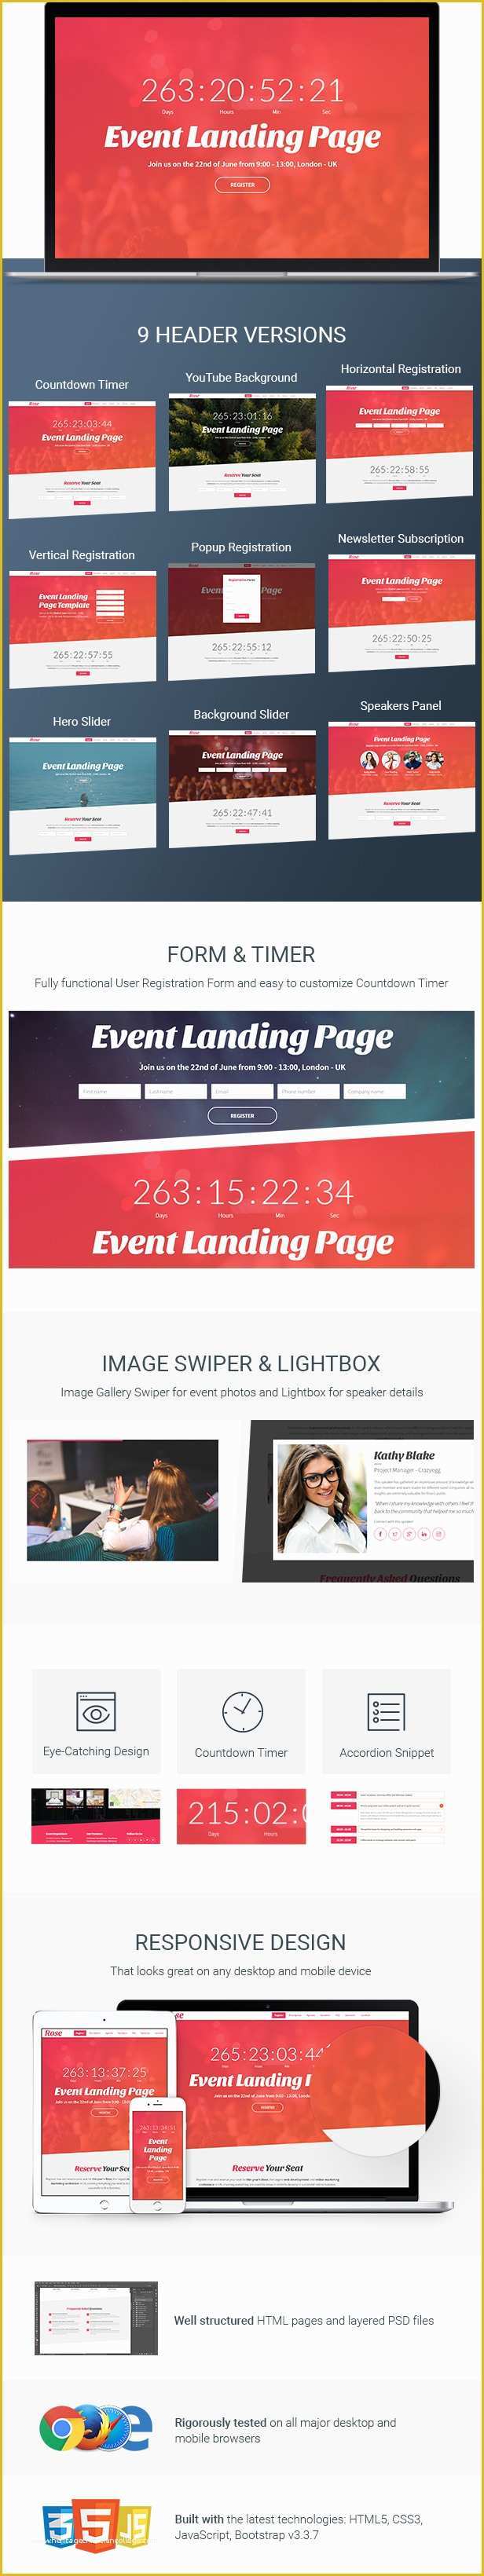 Event Landing Page Template Free Of Rose event Landing Page Template by Inovatikthemes